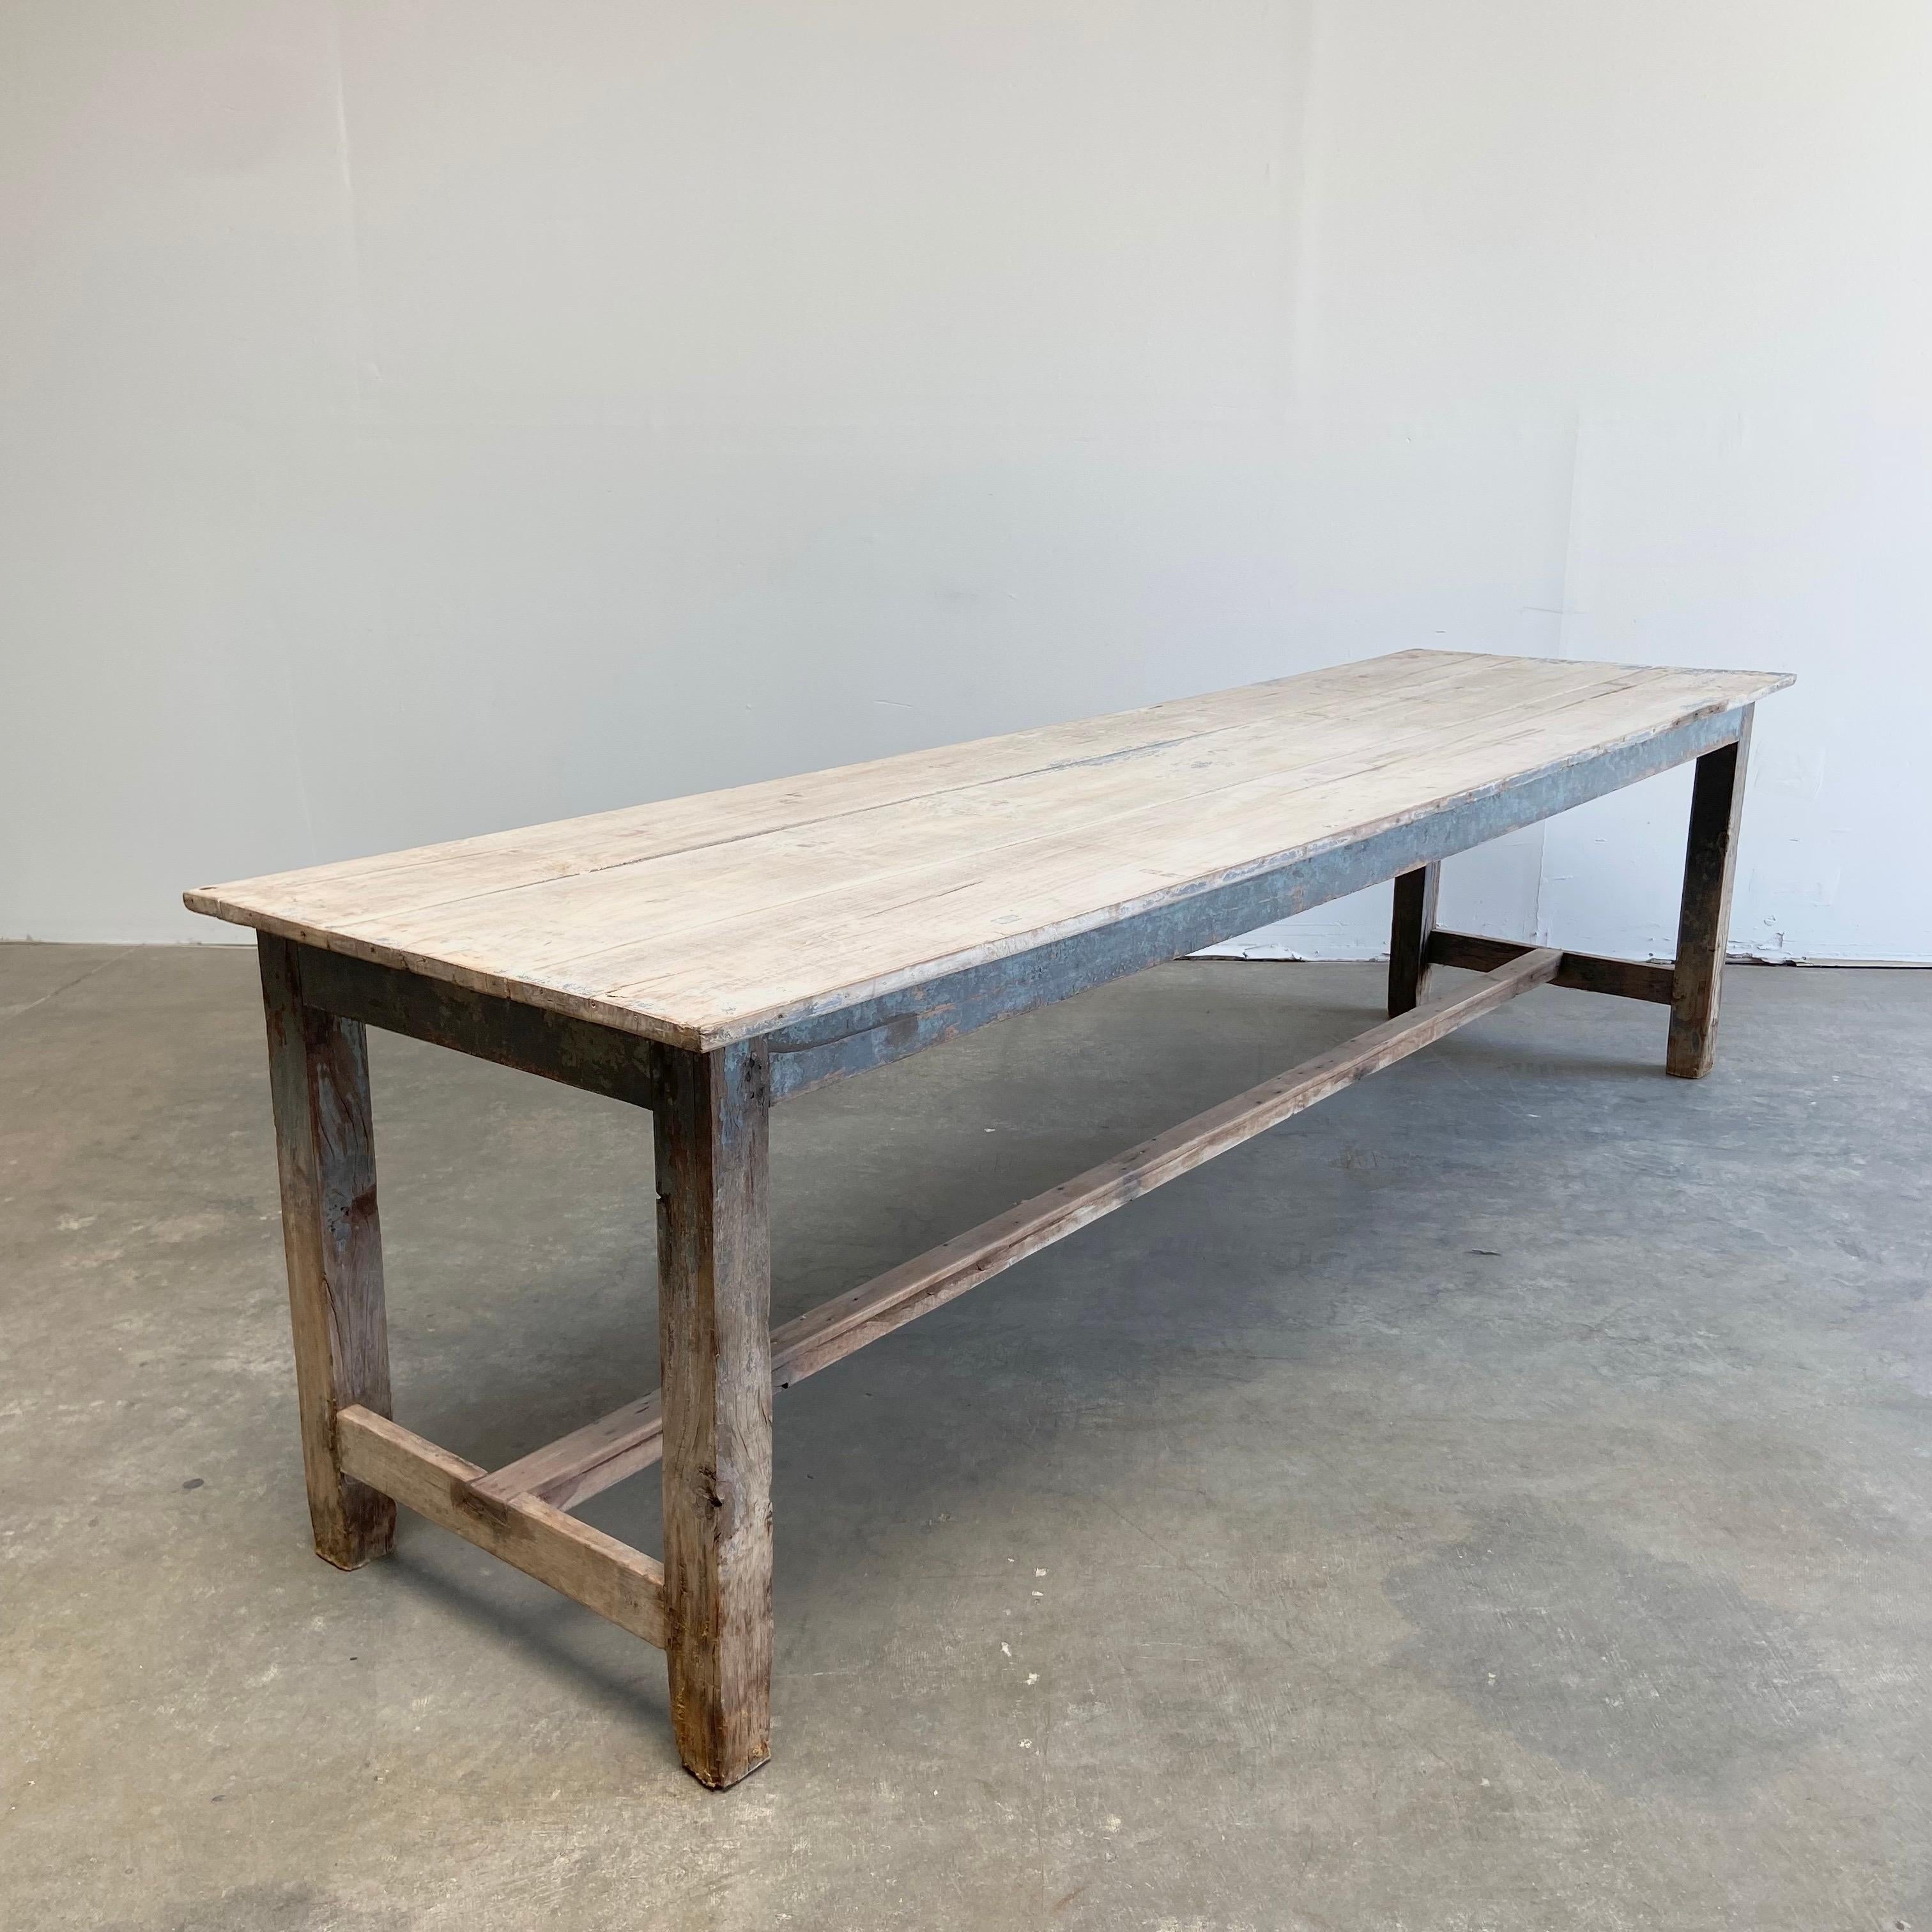 Vintage plank wood farm table with original paint
Size: 108”L x 30”D x 30”H
Clearance under apron: 25-1/2”H
Solid and sturdy ready for everyday use. This beautiful farm style dining table has some original gray blue paint with exposed wood.

    